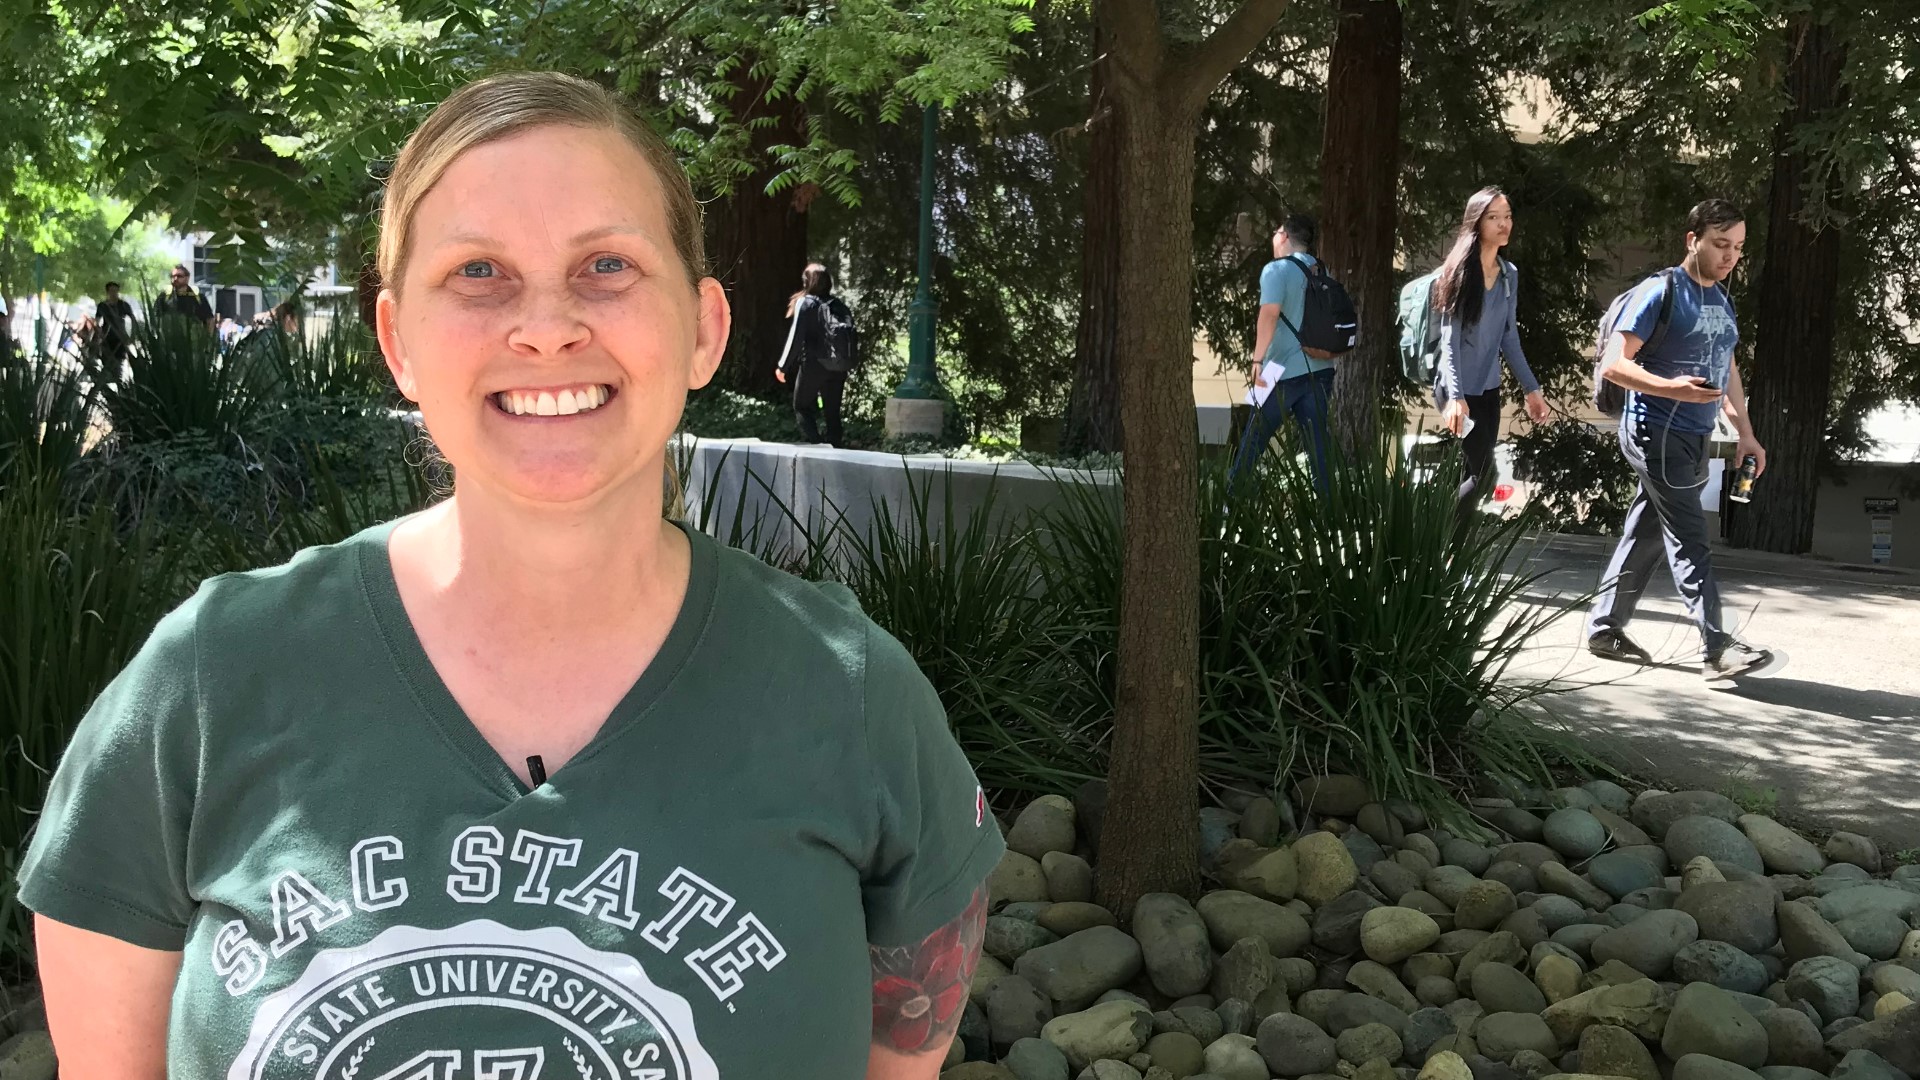 She taught herself to read while in prison, got her GED, and eventually started classes in community college. Now, in just two weeks, she'll graduate from Sacramento State with a degree in social work, and she says it was education that saved her.